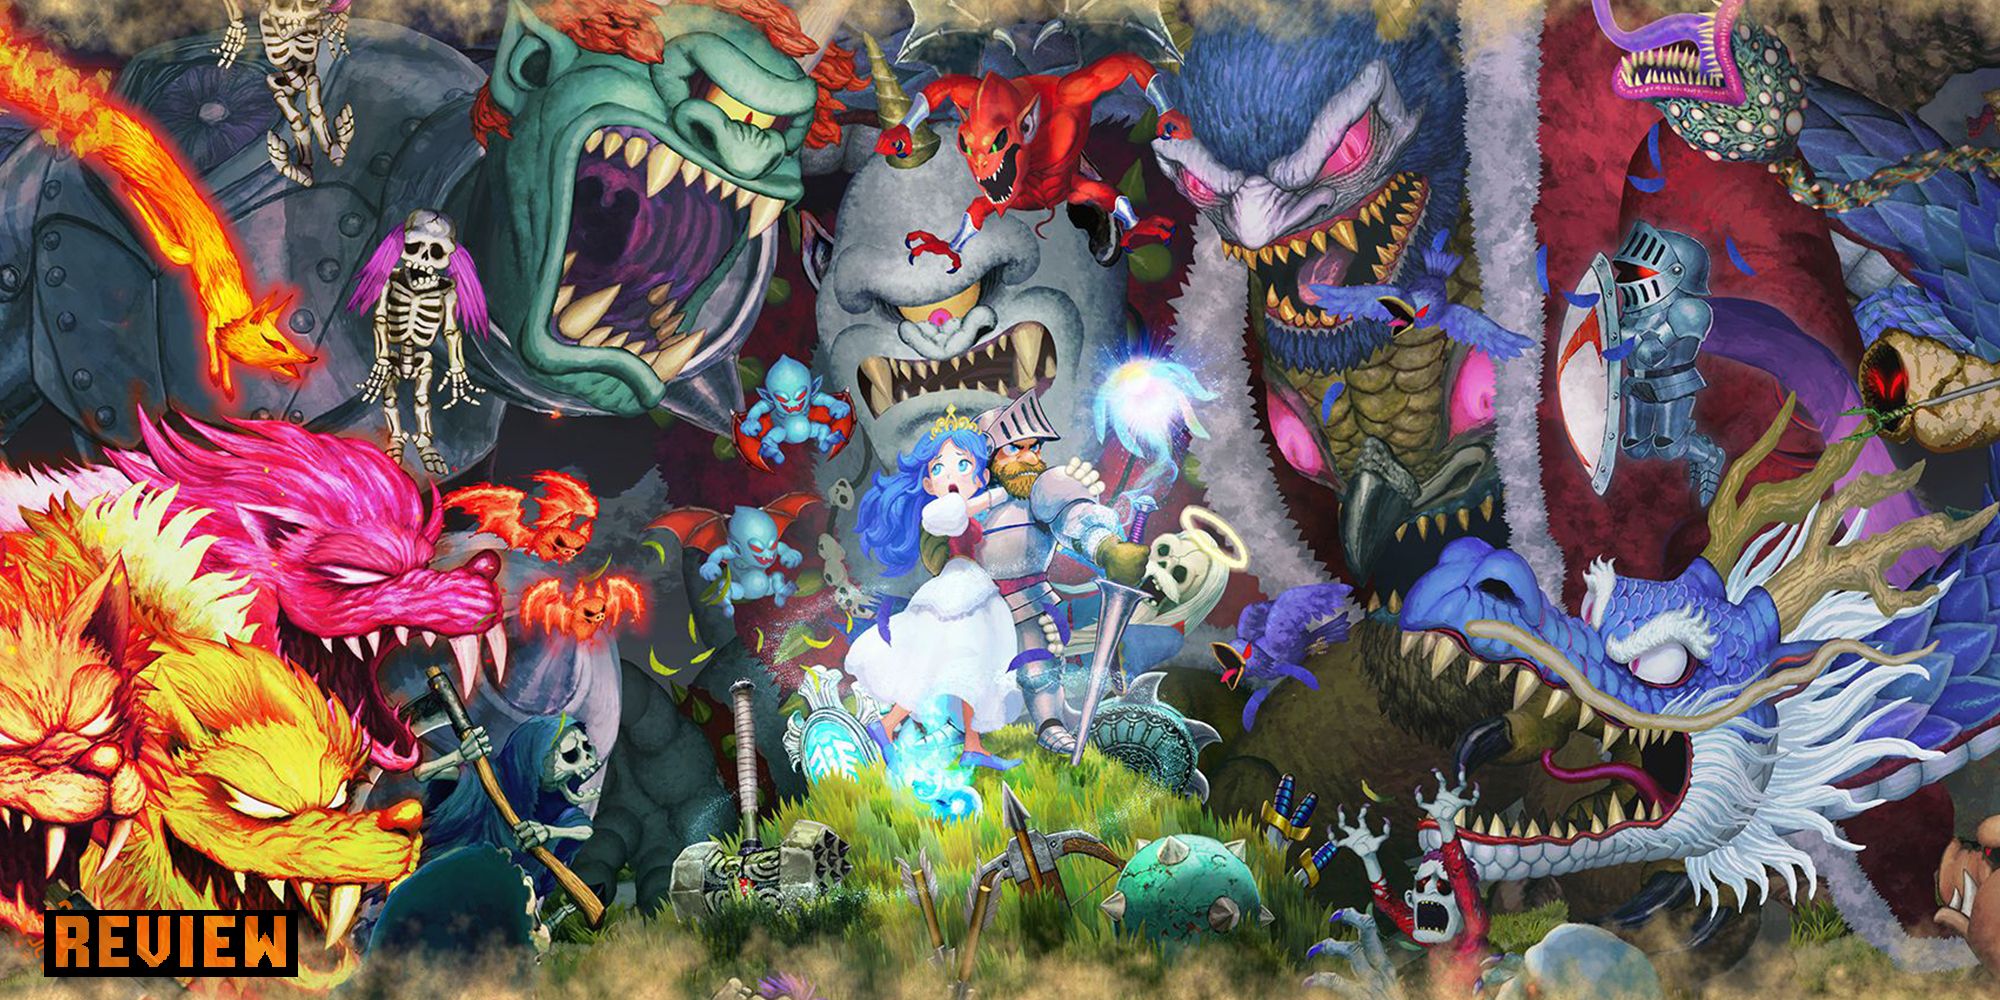 Game art from Ghosts 'N Goblins Resurrection.